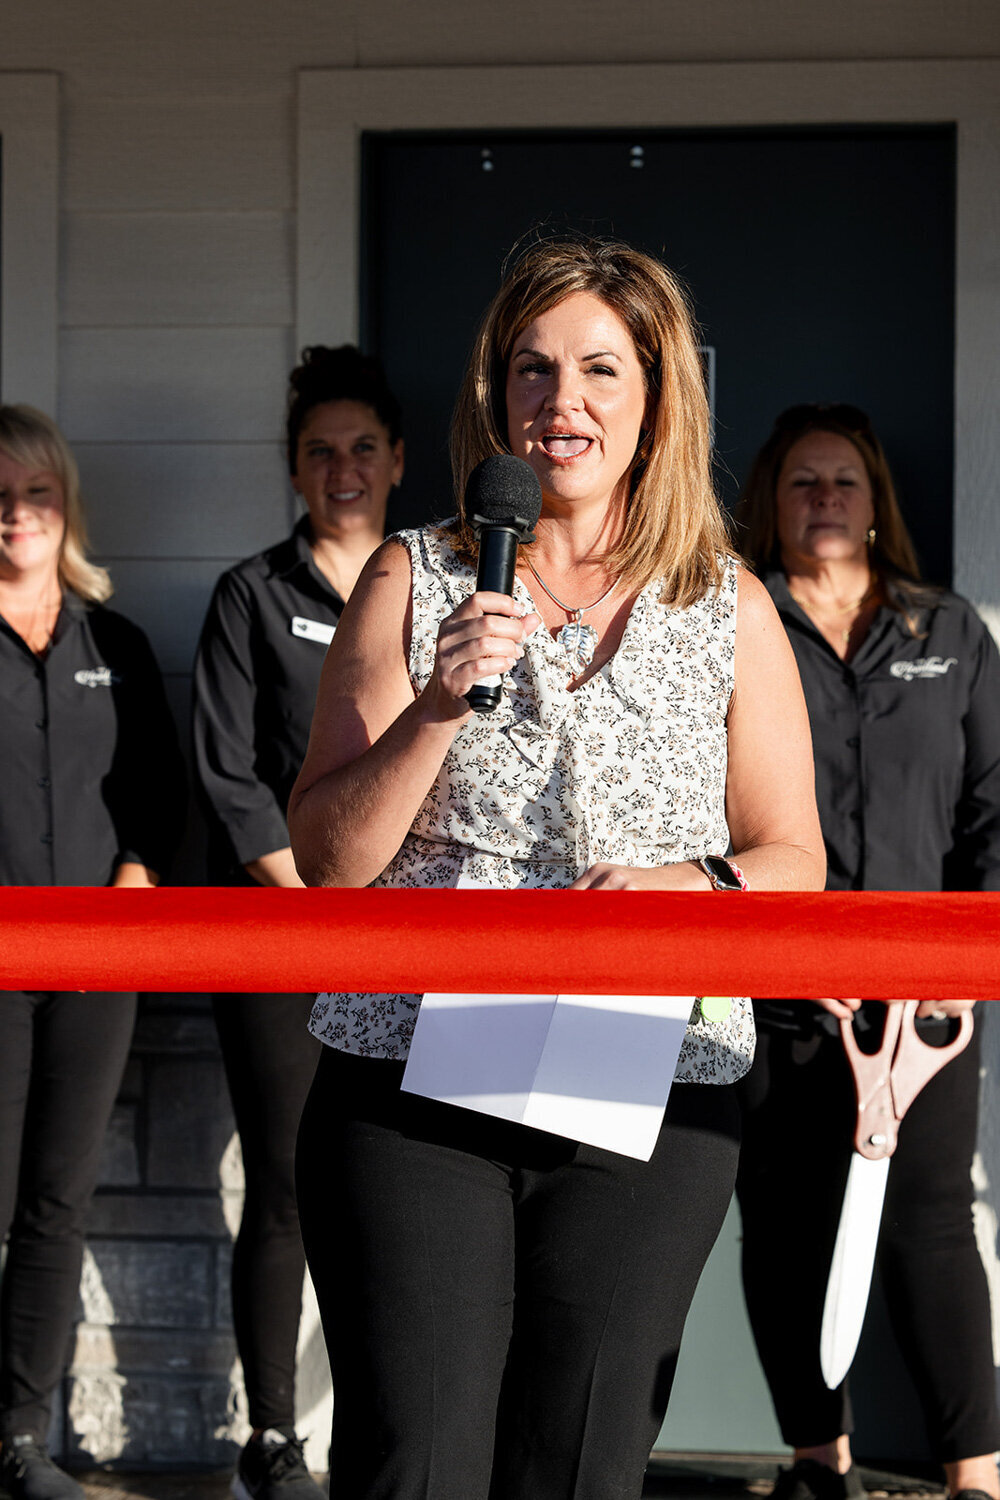 The-Heartland-Lodge-Lodging-Ribbon-Cutting-Ceremony-26